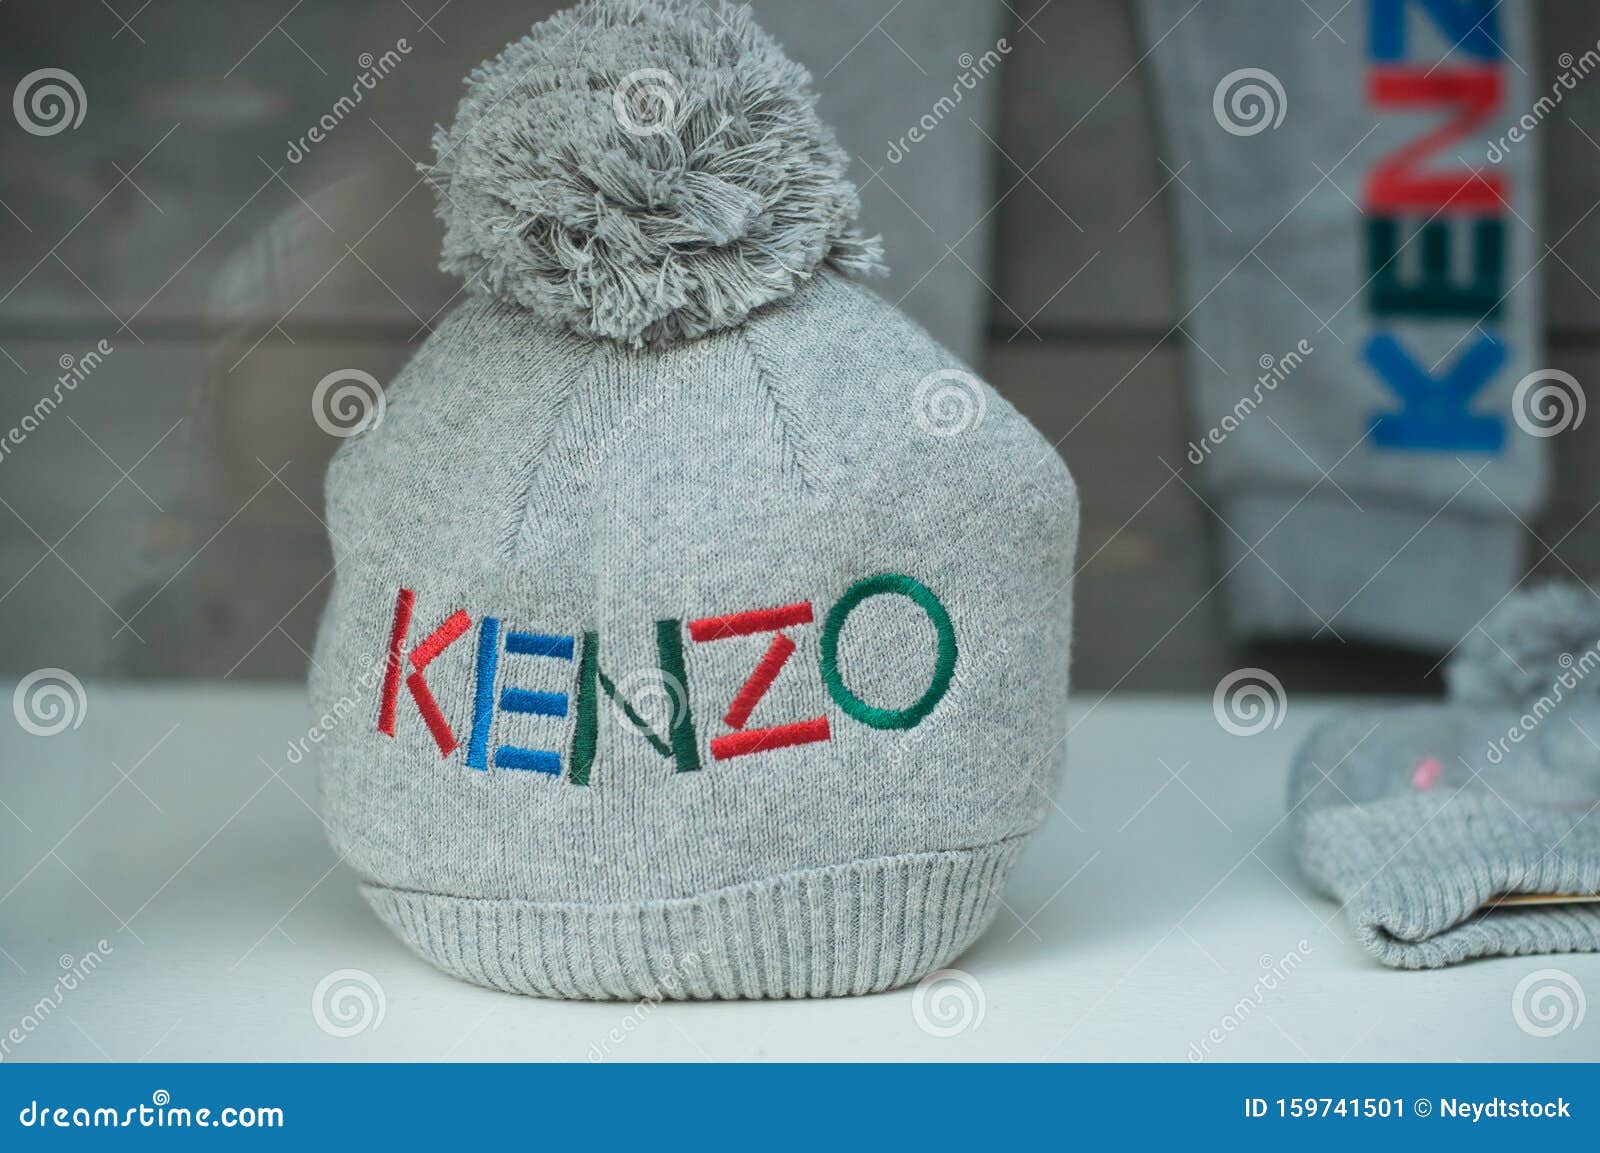 Woolen Hat from Kenzo Brand, the Famous French Luxury Company of LVMH Group  Editorial Photo - Image of famous, group: 159741501